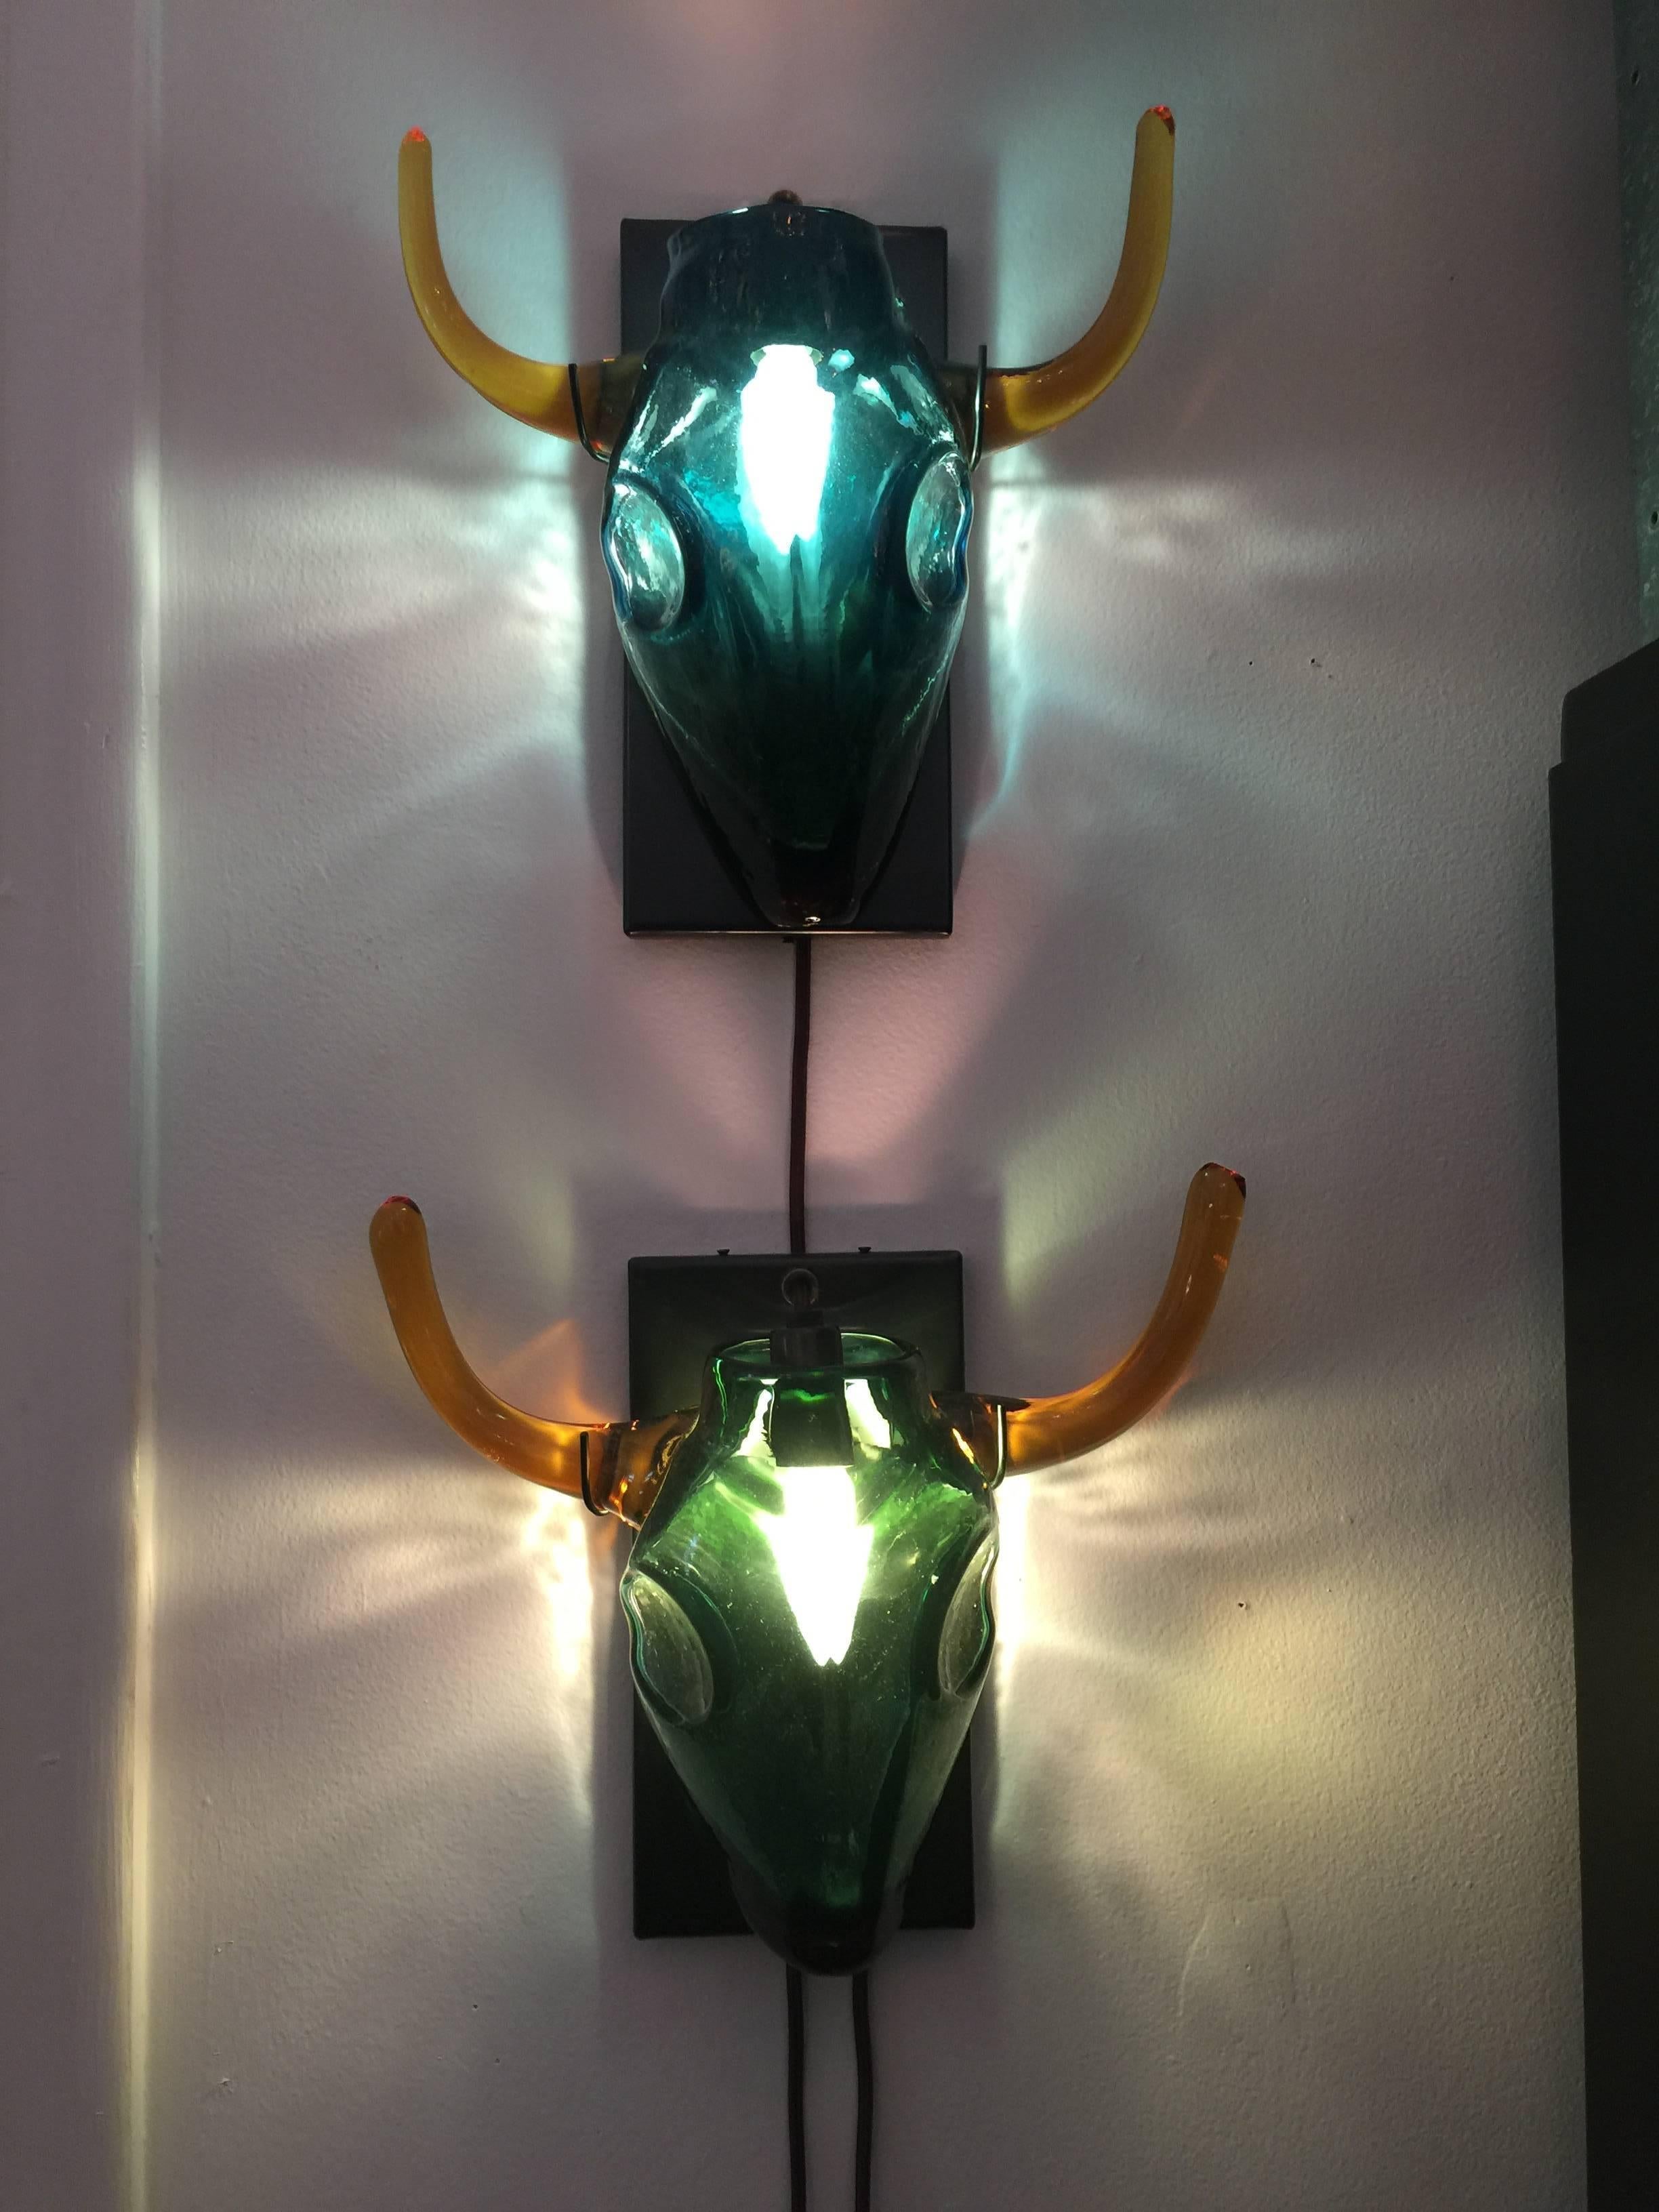 Inspired by Picasso, two of these unique handblown glass sconces are available with slight color variation to the glass. As seen in detail images, one has a slightly green tint and the other blue tint. Recently rewired, UL listed. 

Back plate